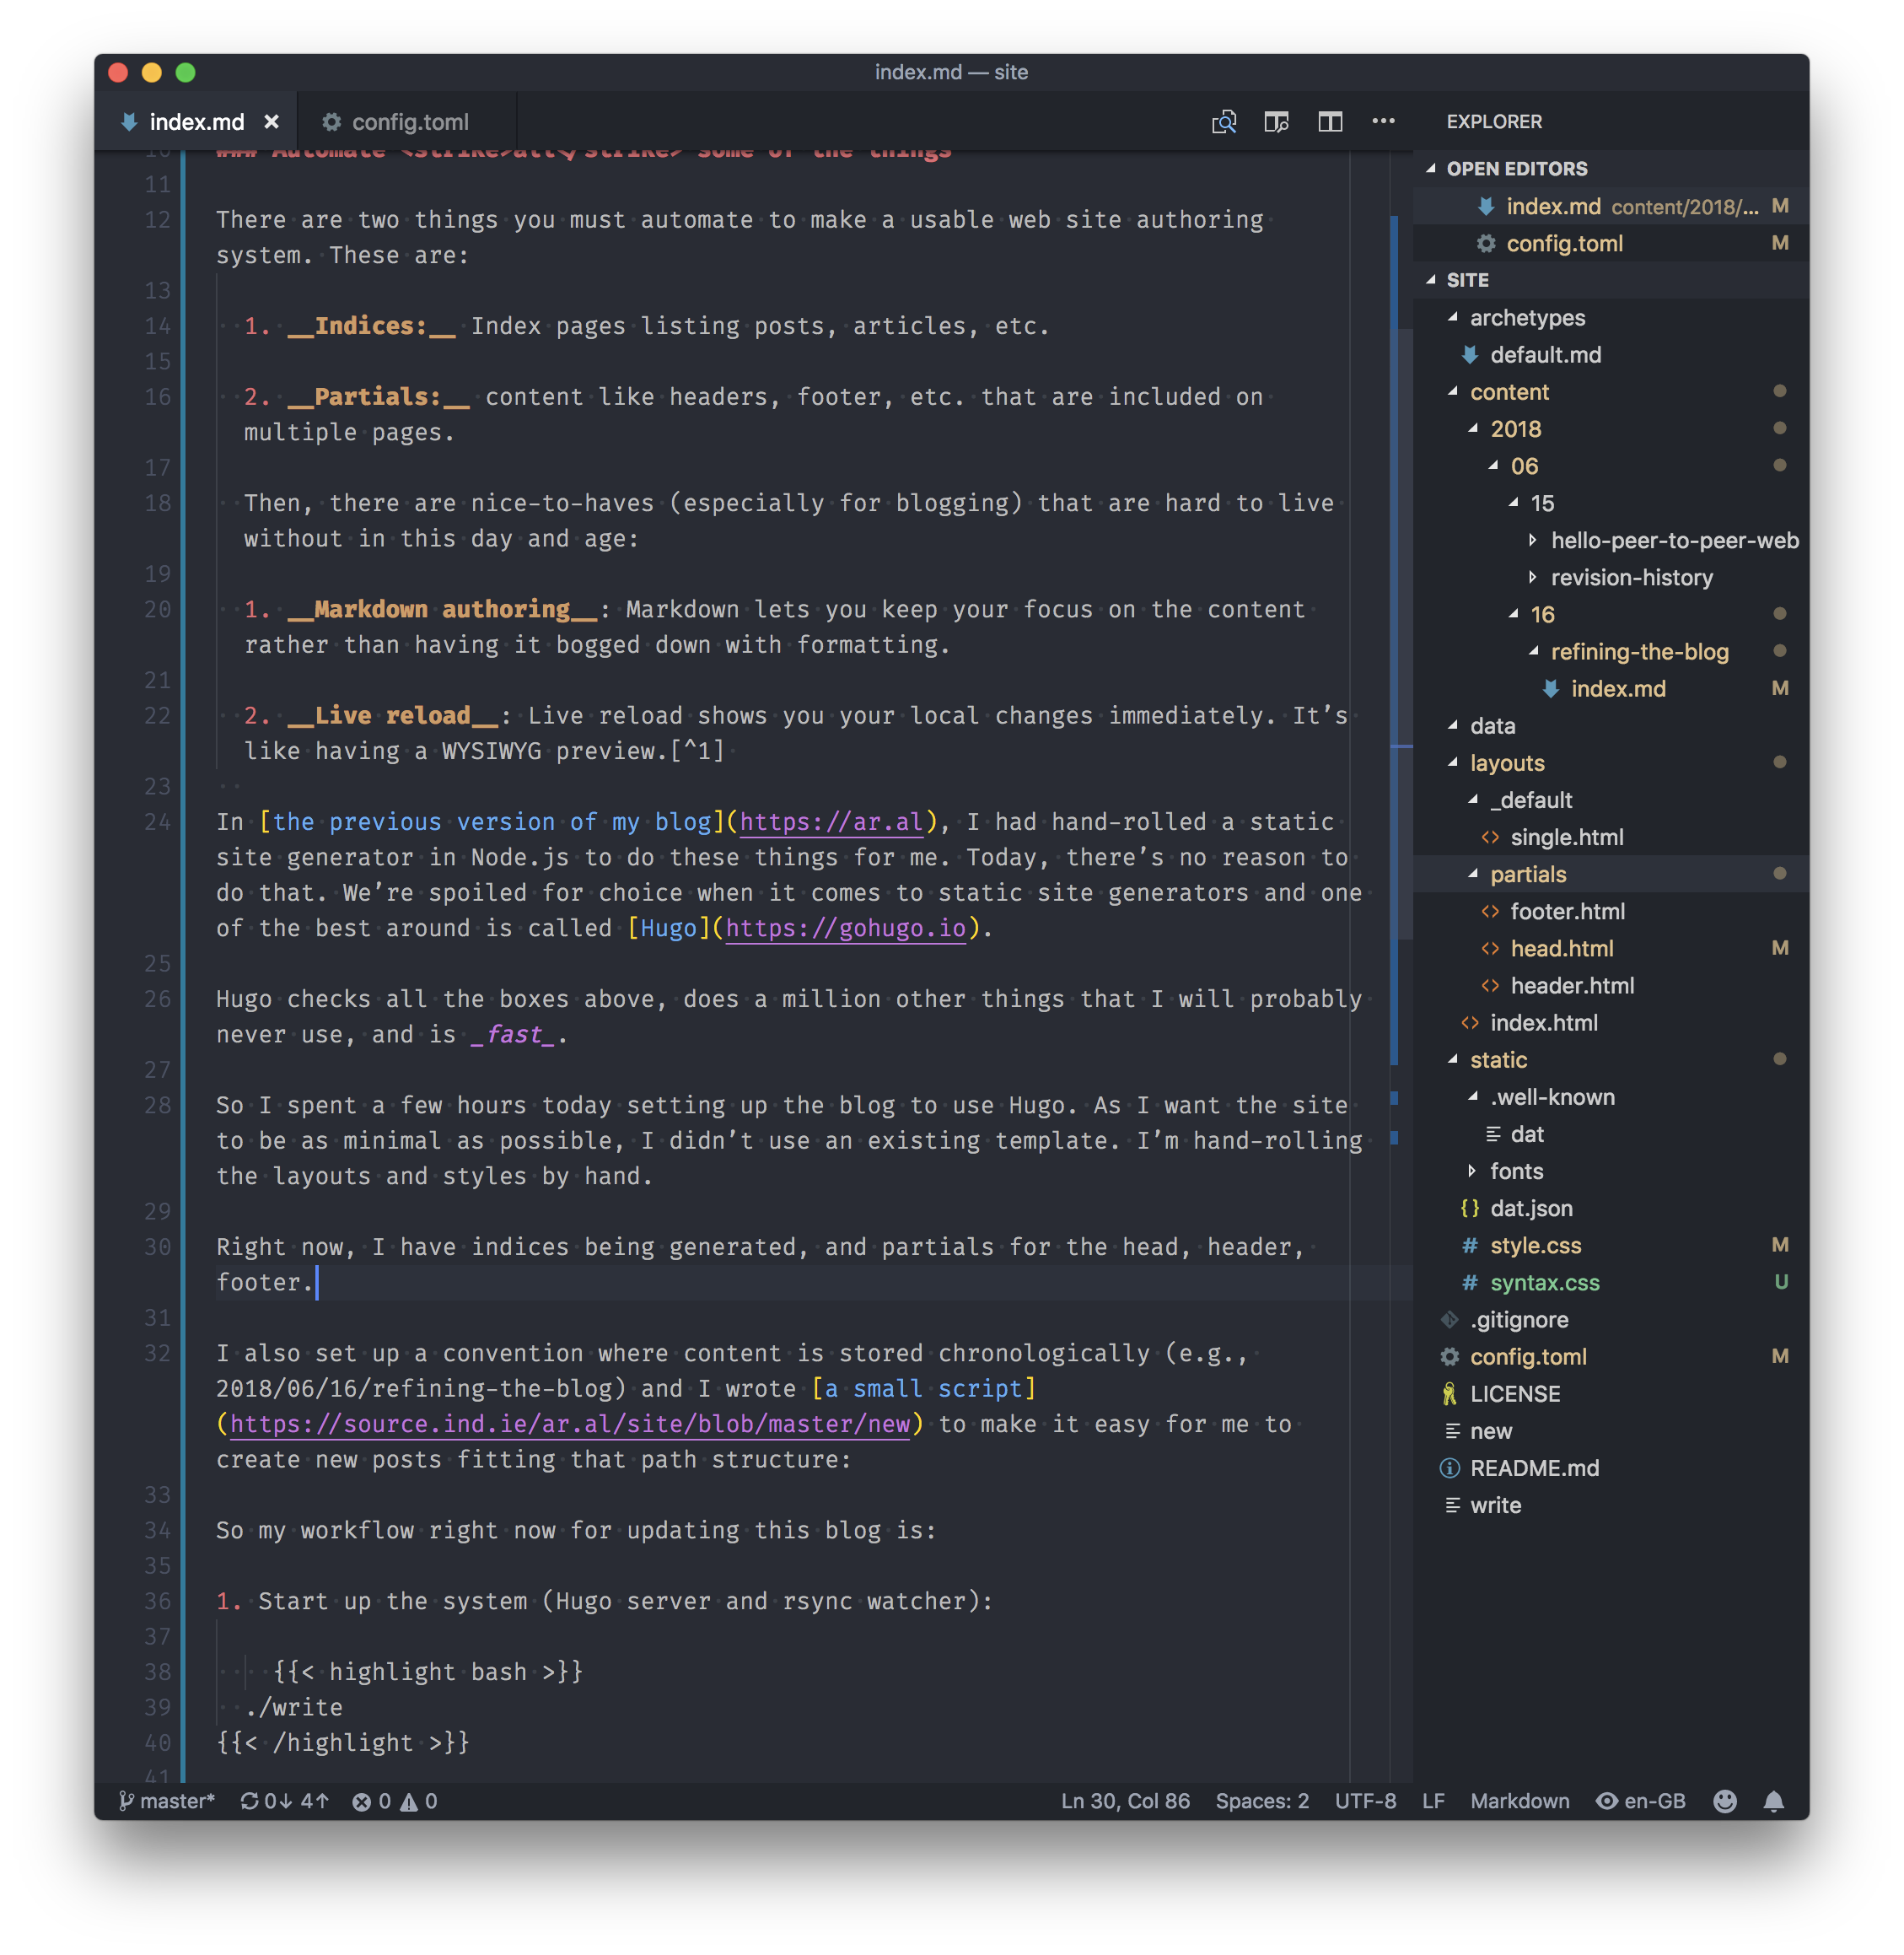 The Markdown text for this blog post shown in my VSCode window